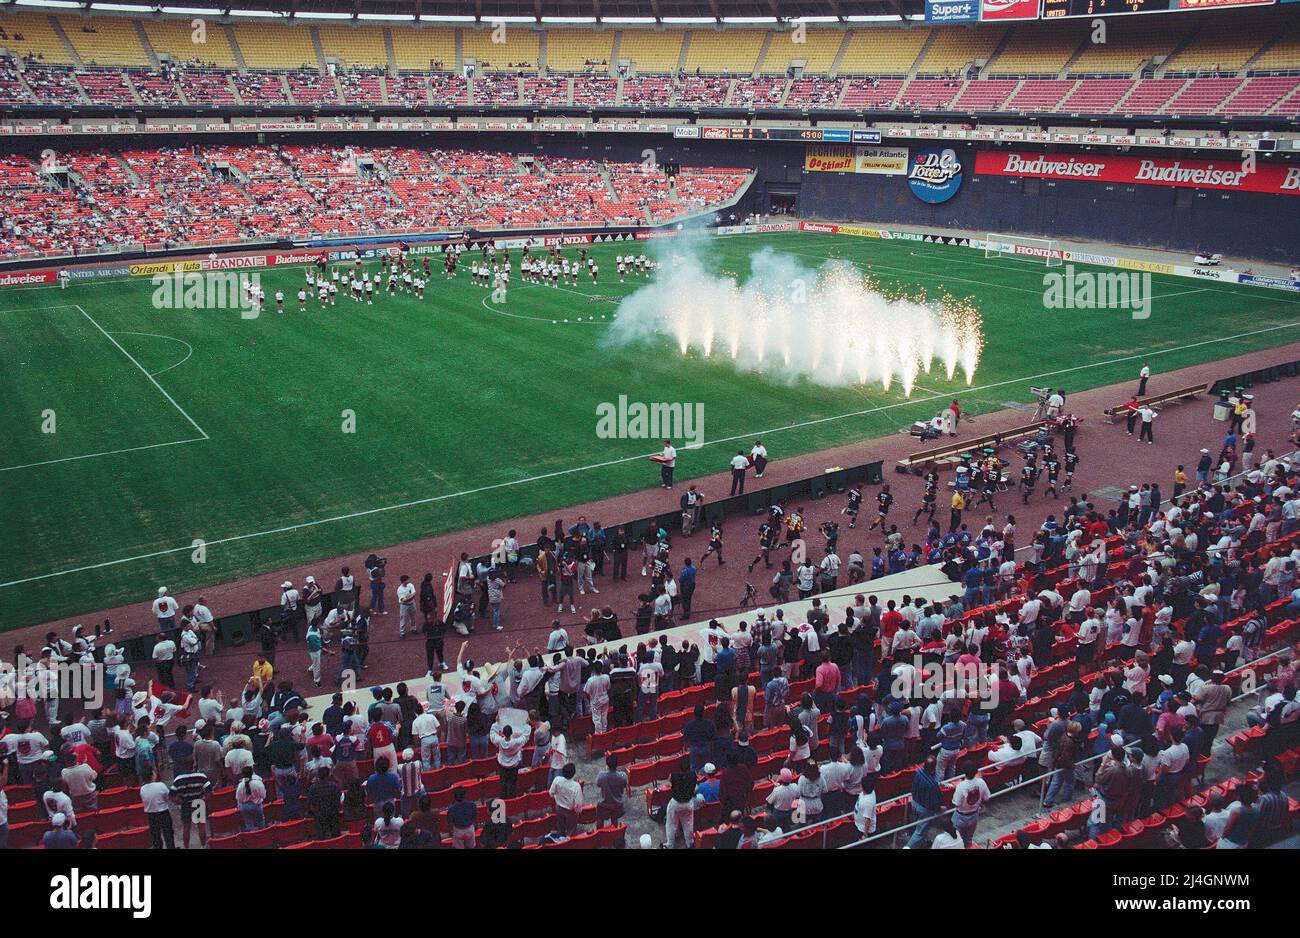 Celebrating the first MLS match at RFK